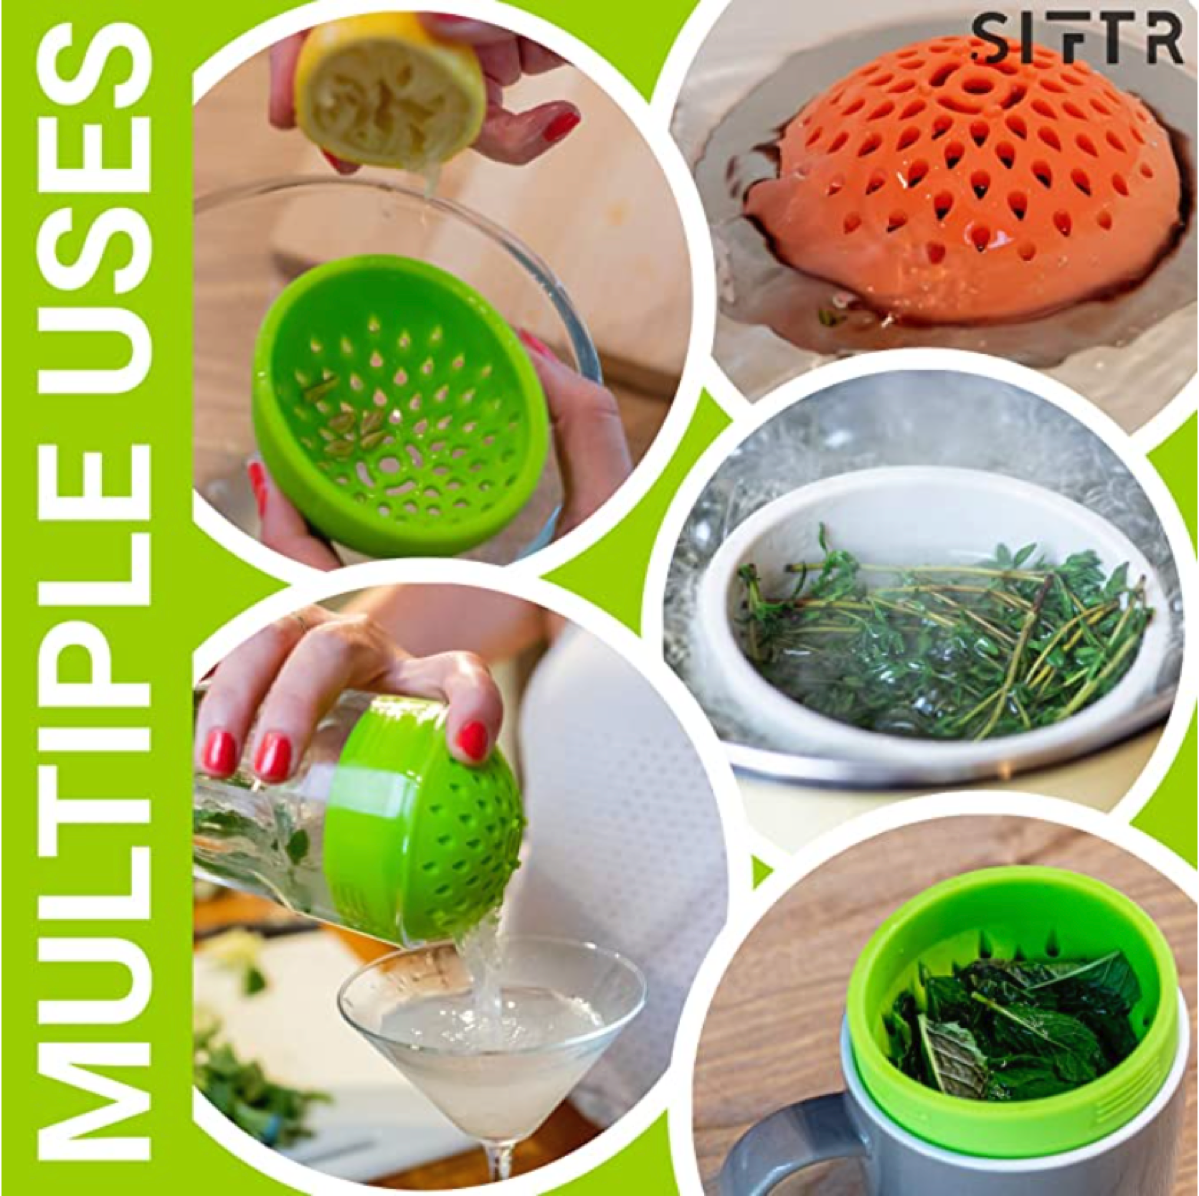 Silicone Can Filter, Multifunctional Mini Colander, Food Mesh Can